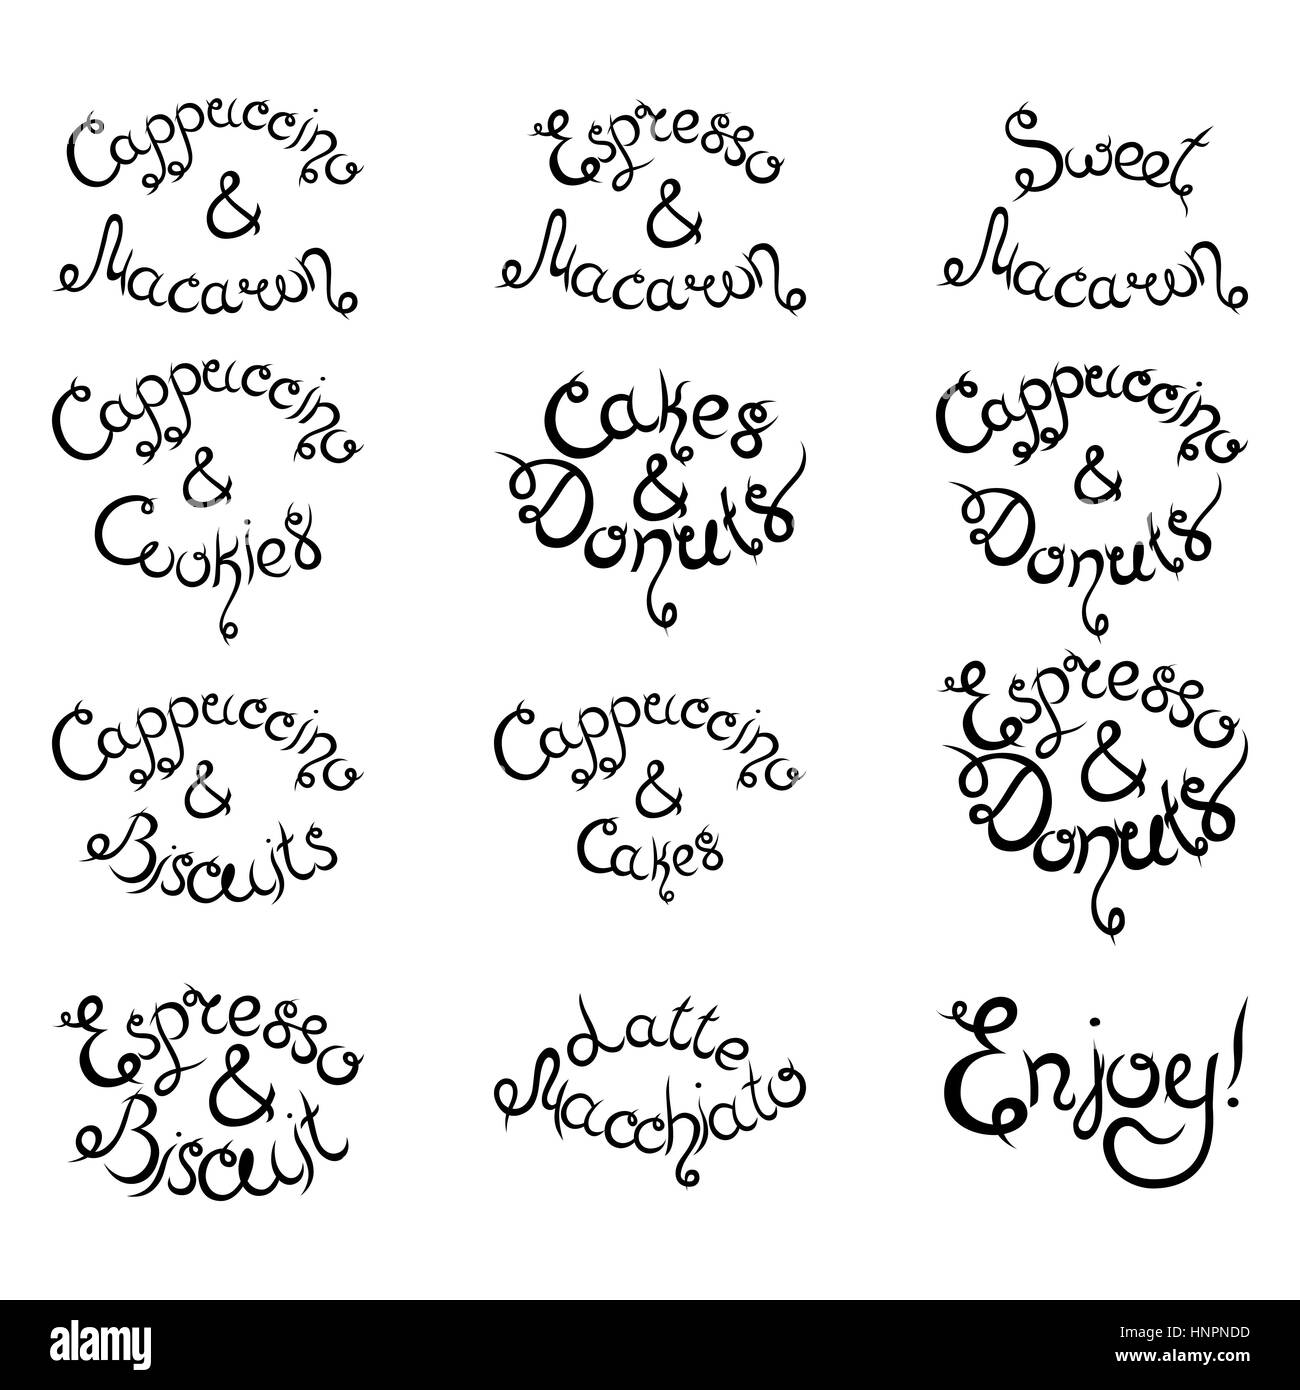 Set 1 of curly hand-drawn lettering Phrases for Coffee Shop. Espresso Cappuccino Cakes Donuts Macarons Cookies Biscuits Latte Macchiatto Cup of Coffee Stock Vector